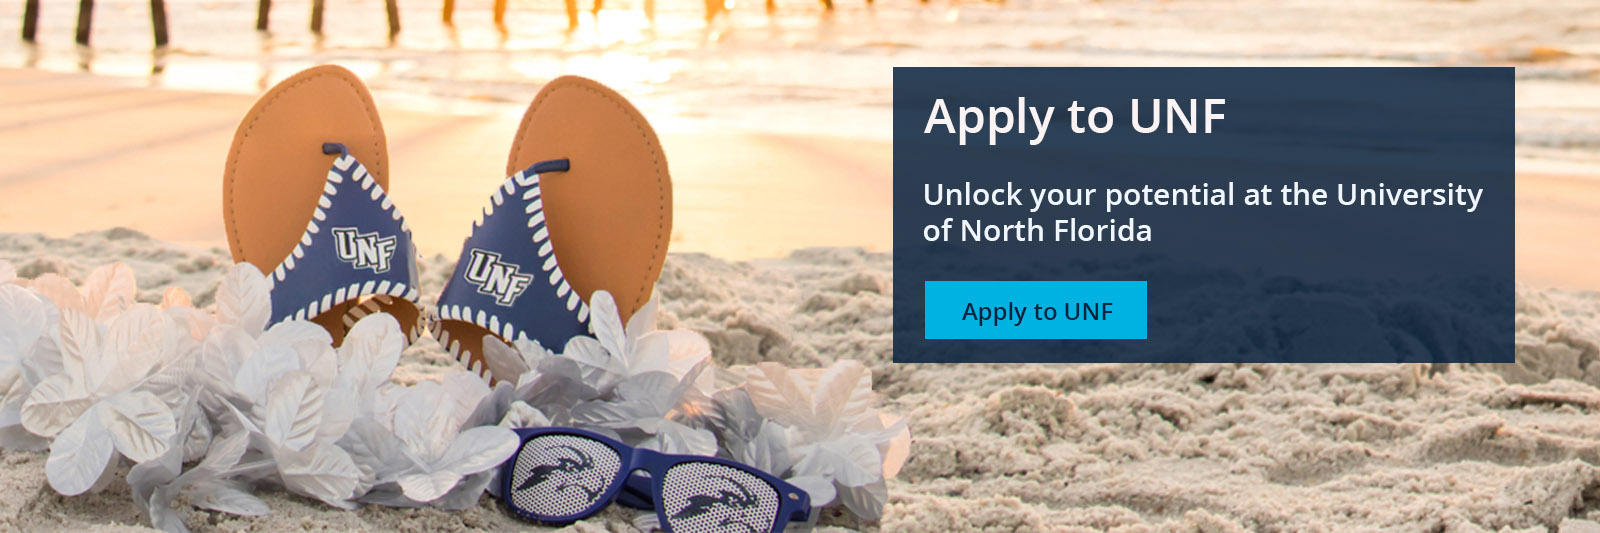 Sandals on beach with lei and sunglasses text of Apply to UNF Unlock your potential at the University of North Florida